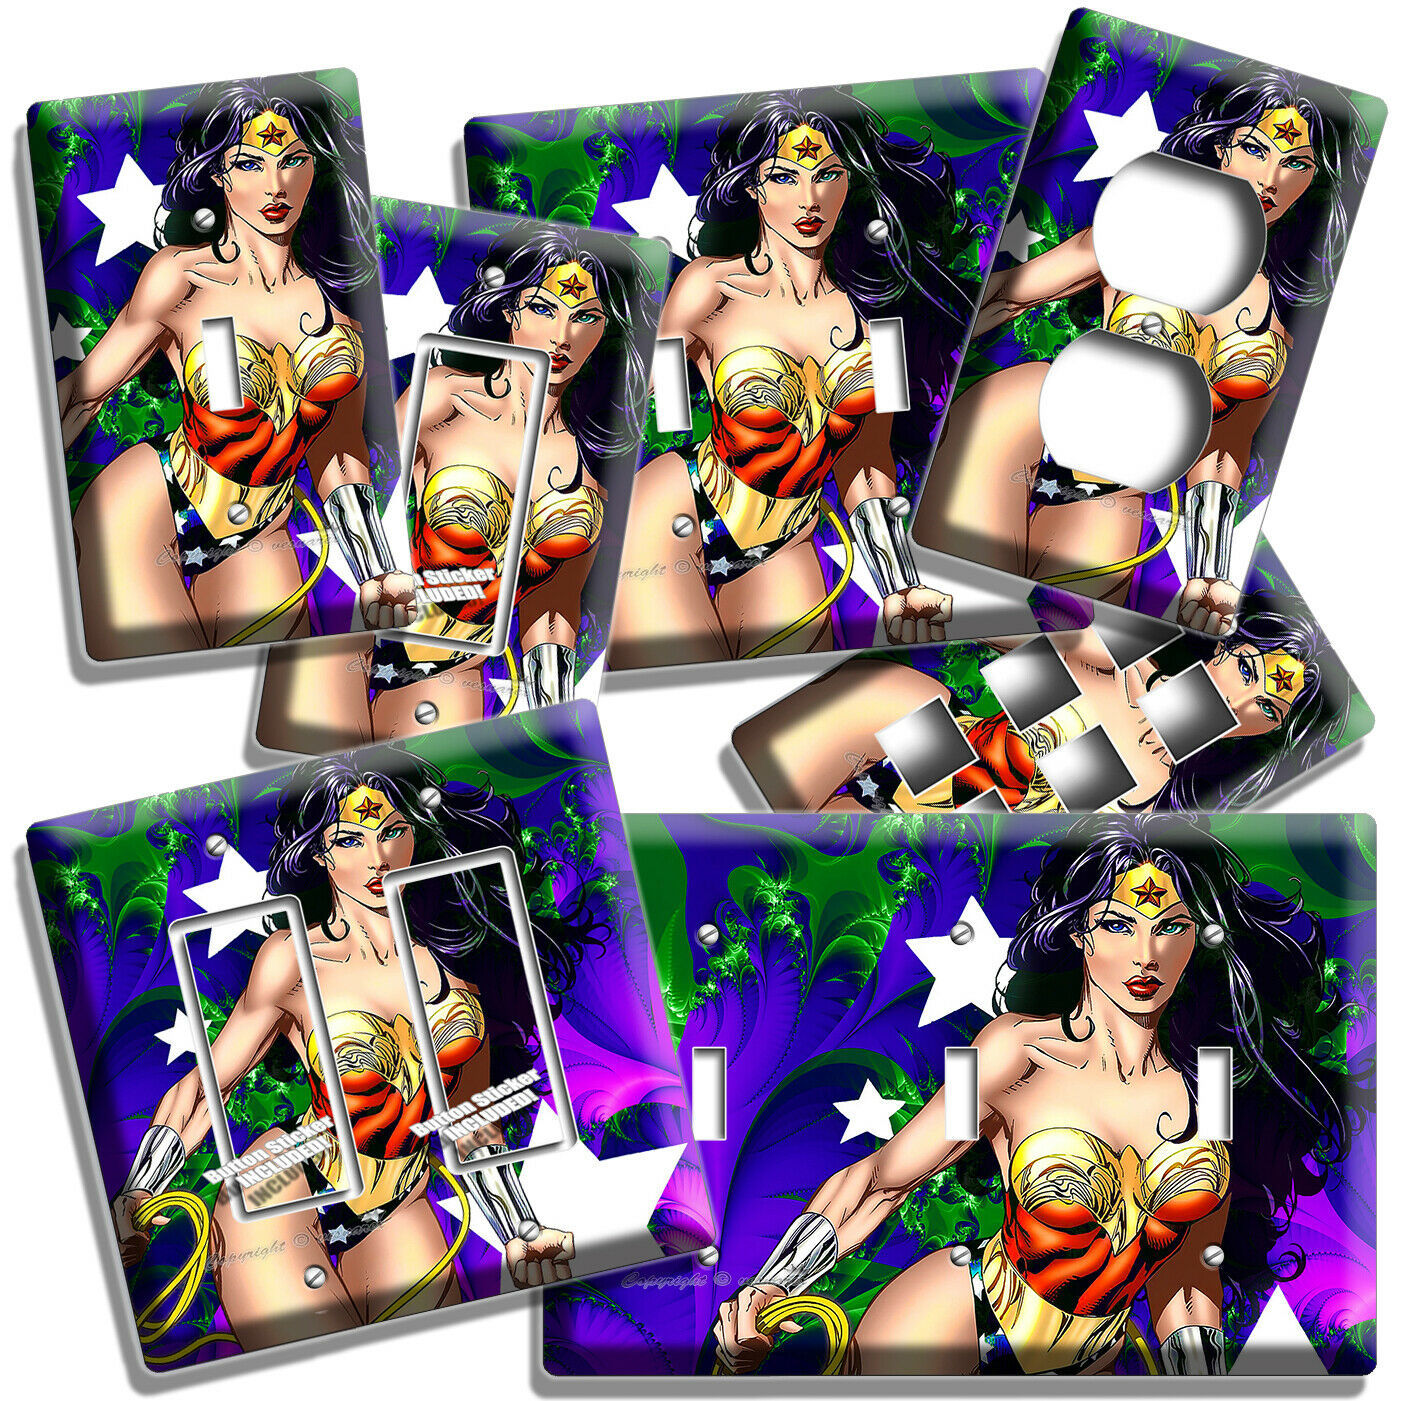 ☆ SEXY WONDER WOMAN SUPERHERO LIGHT SWITCH OUTLET WALL PLATE COVER GIRL ROOM ART